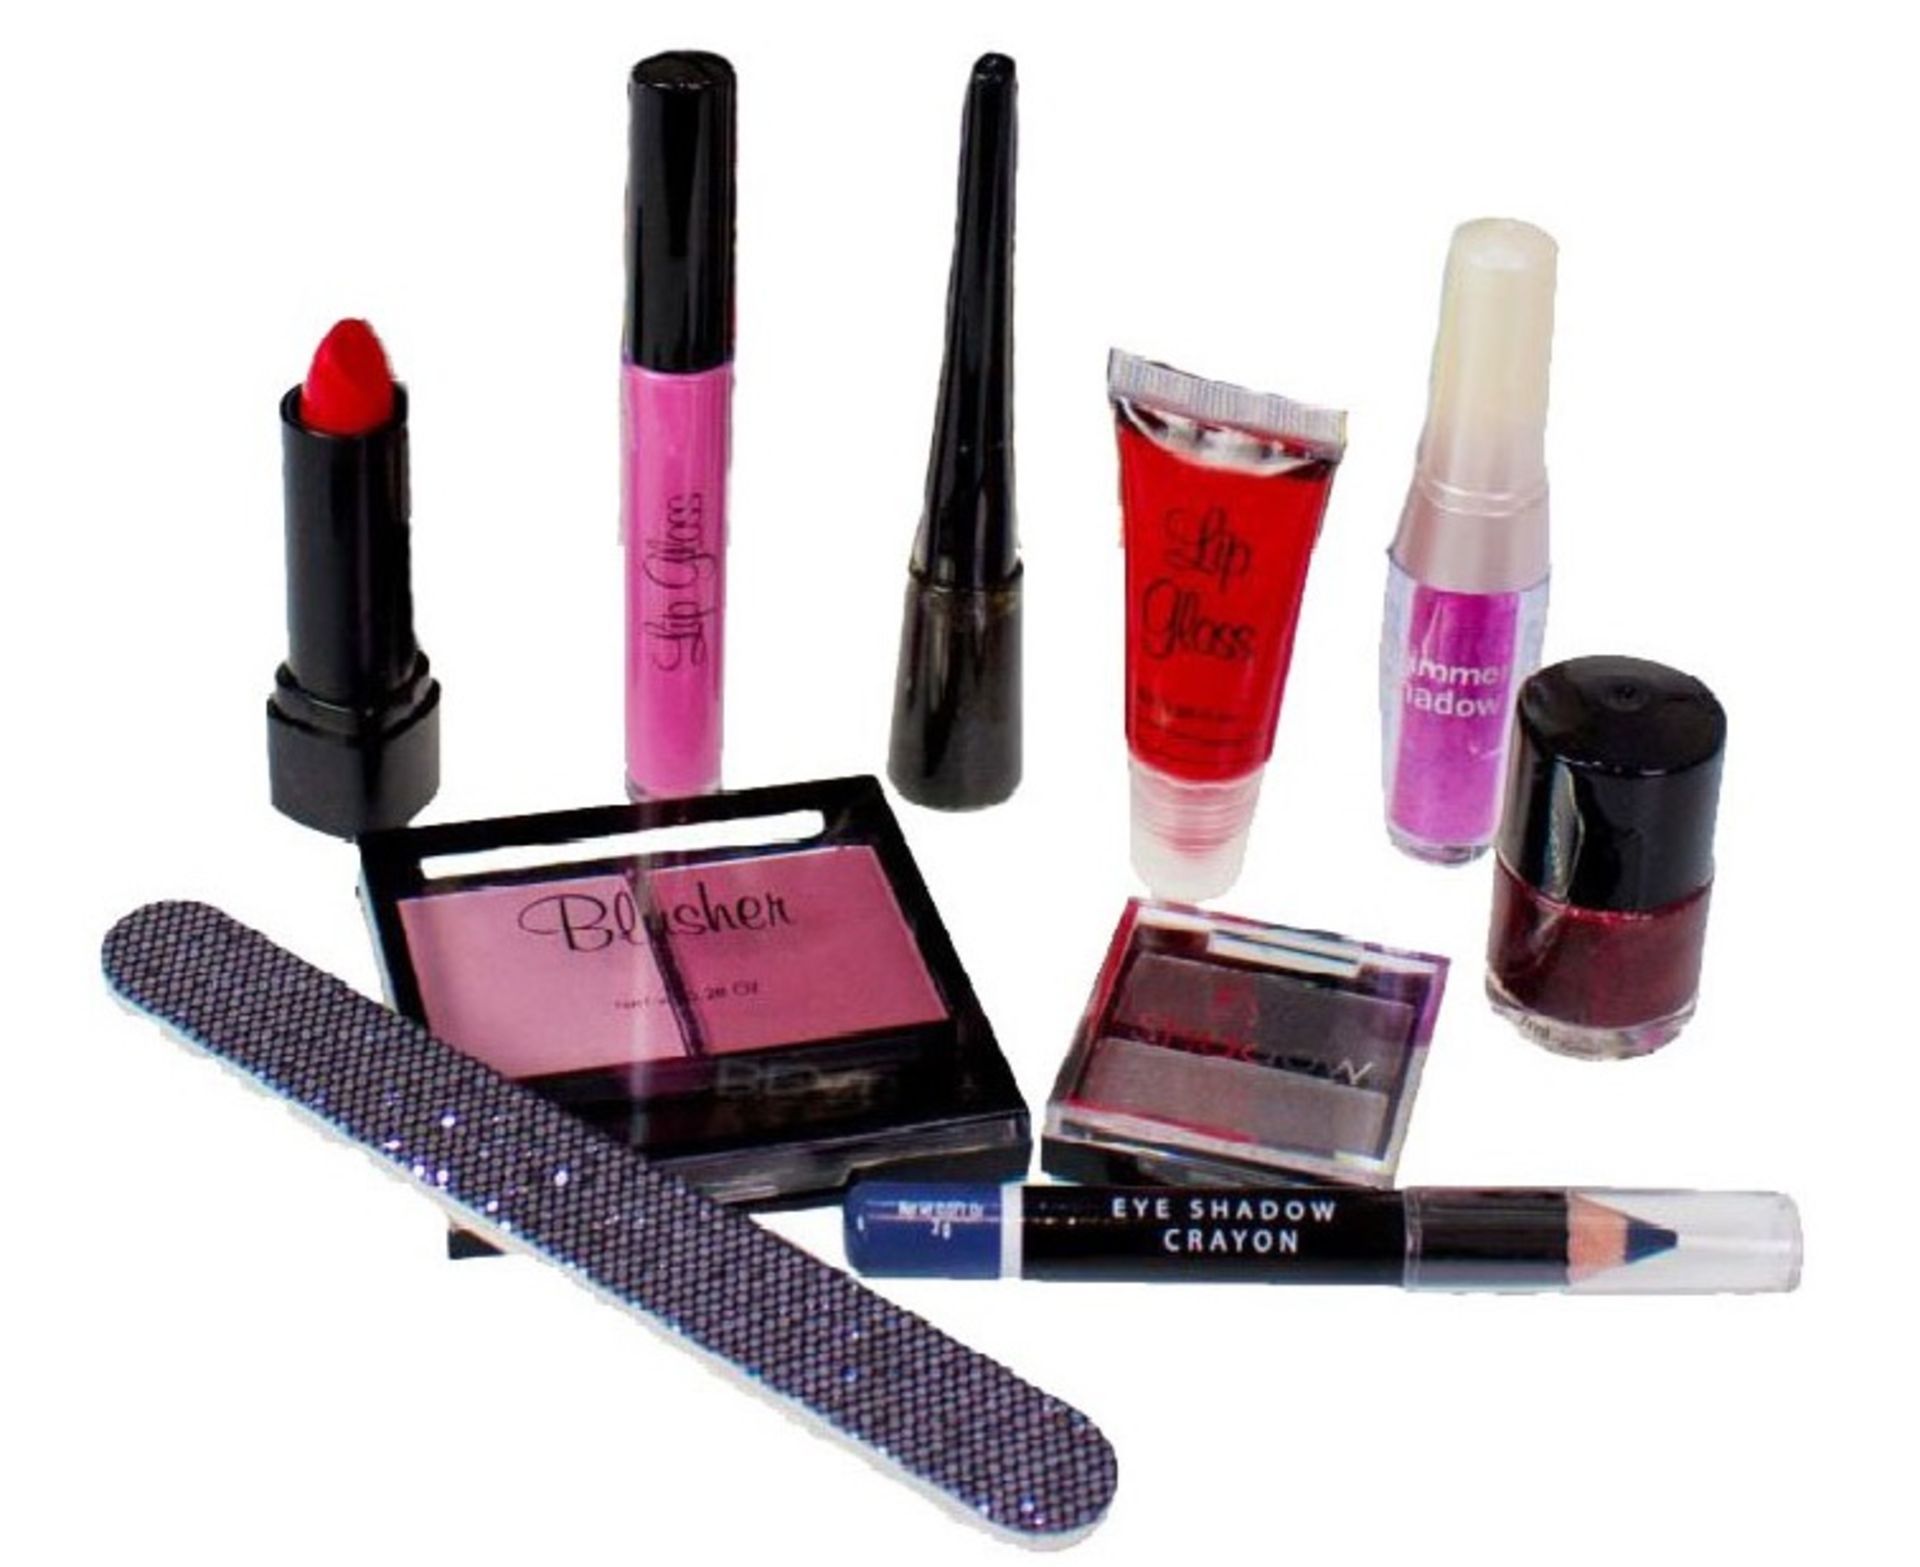 V Brand New Ten Beauty Product Selection in Gift Bag (Contents vary) - Image 2 of 2